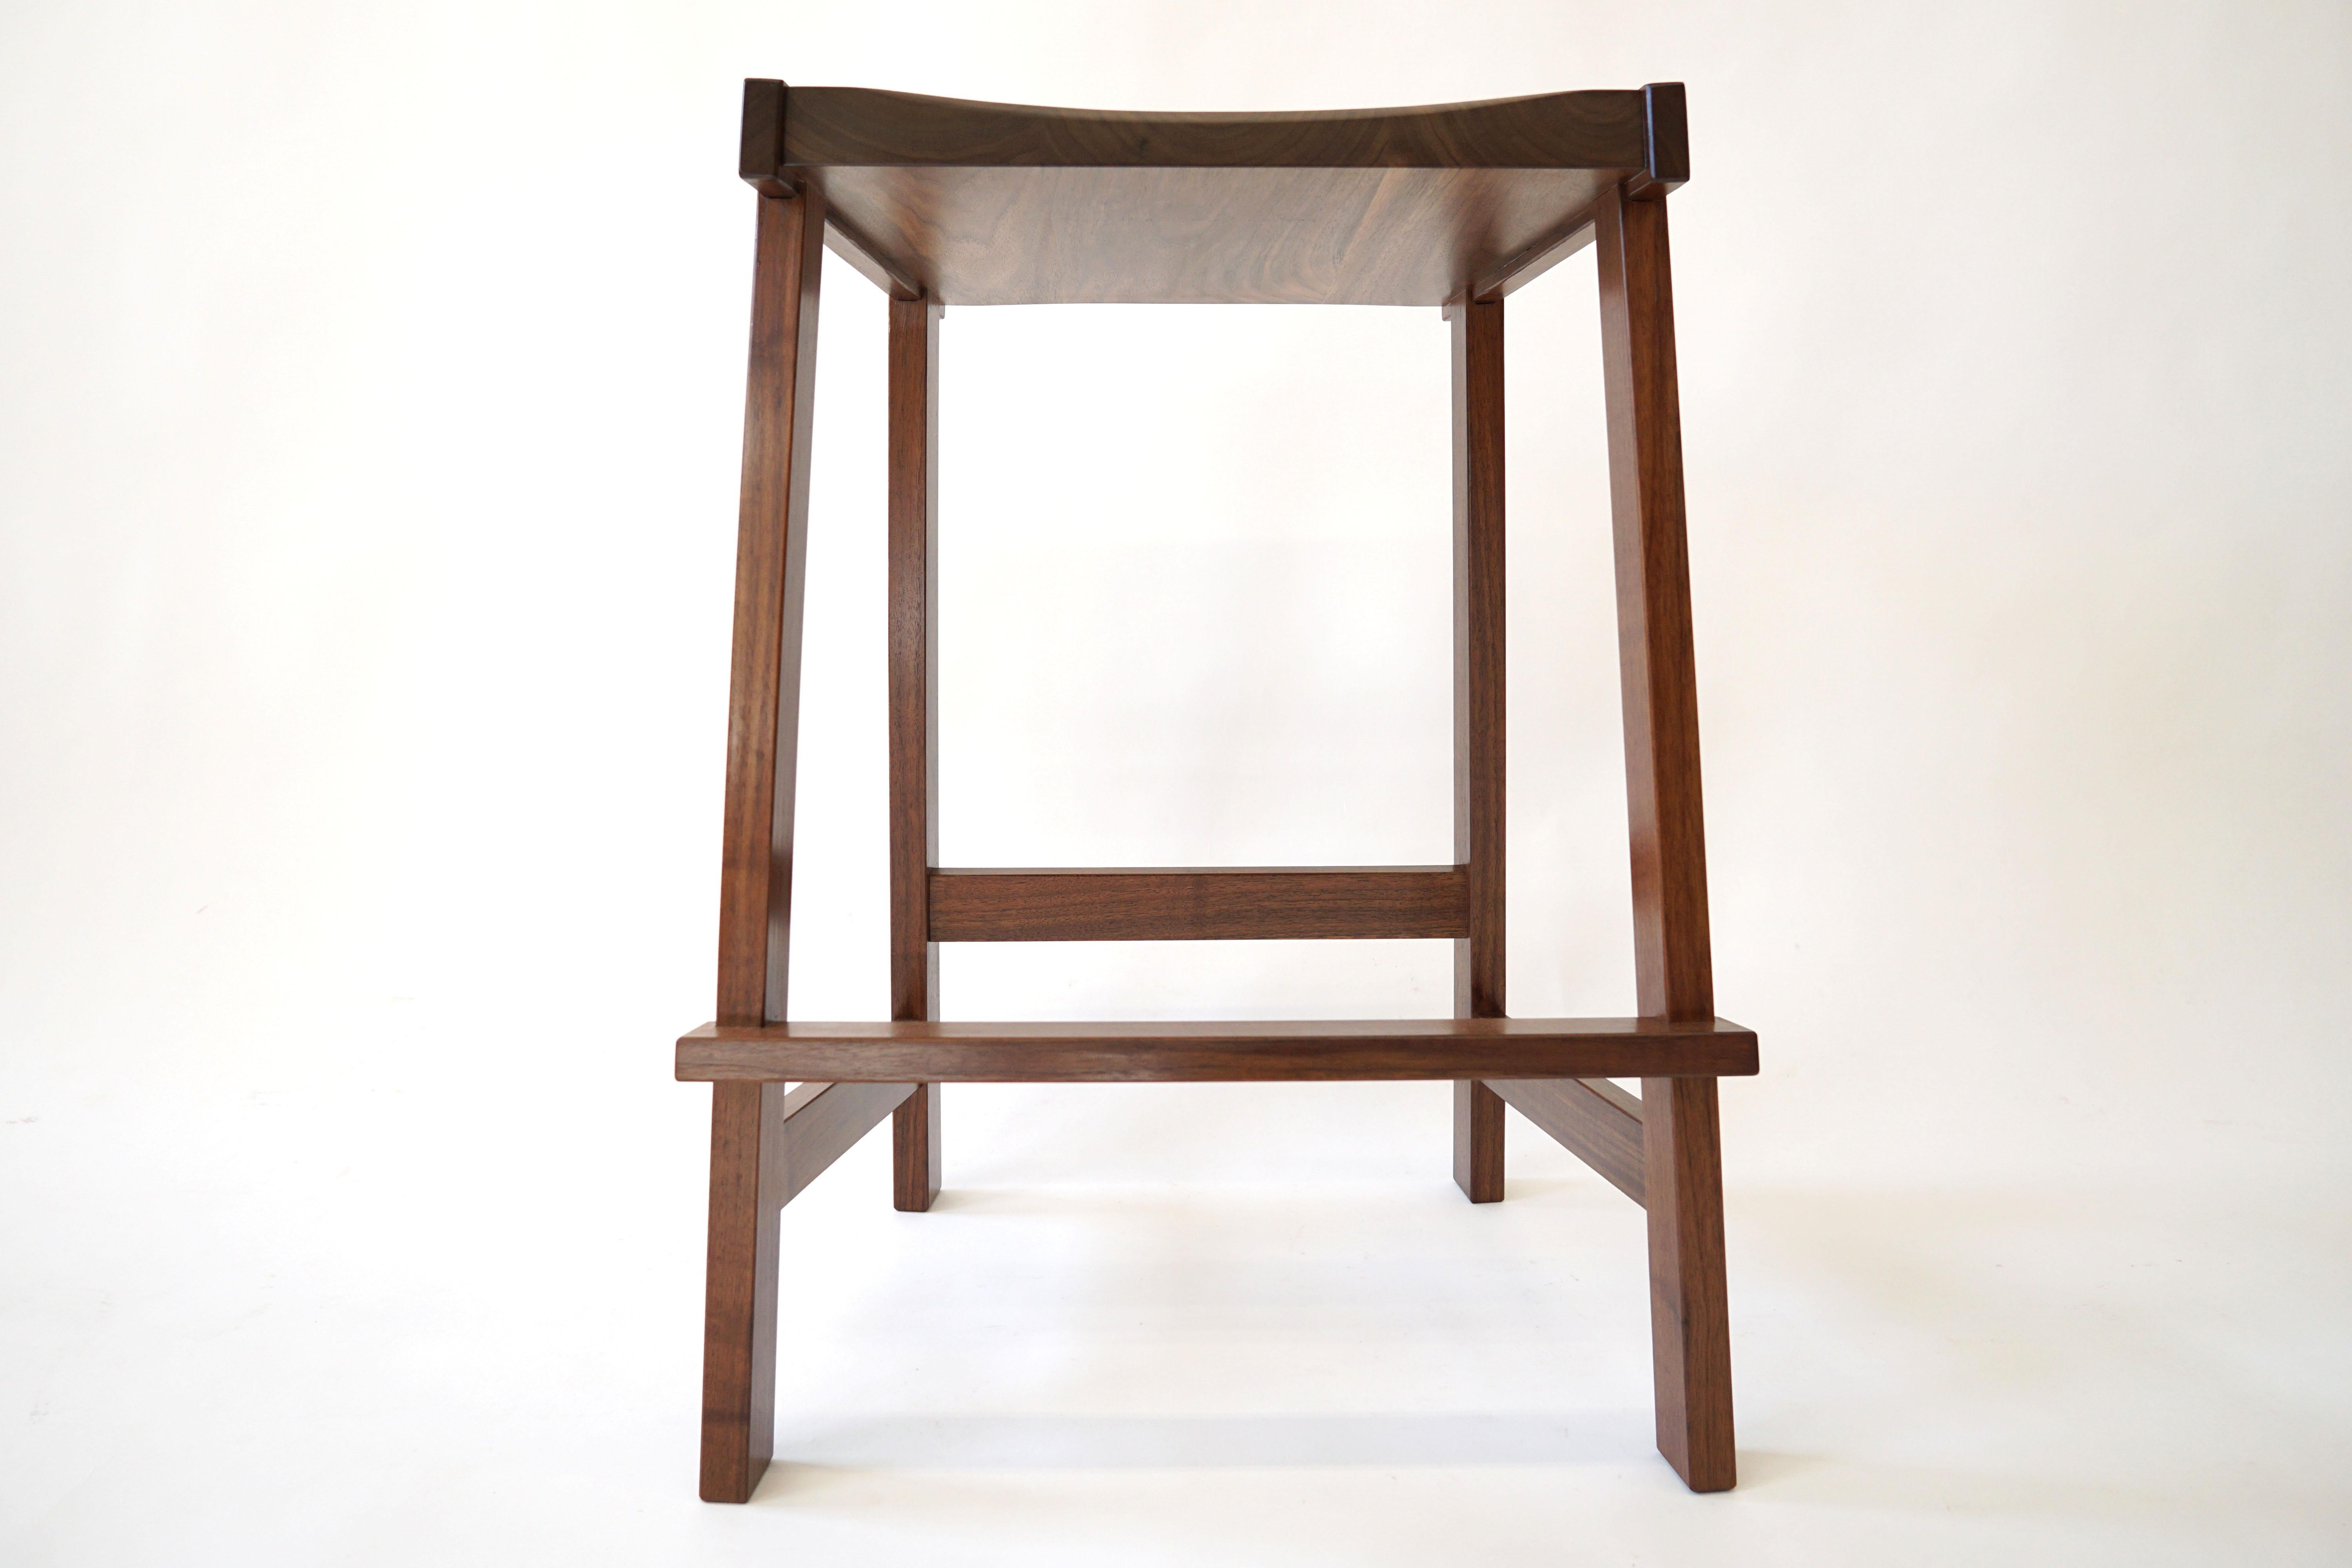 The Montrose Stool, a sharp, bold, angular form. Made from solid hardwoods with a carved seat for comfort. Constructed with lots of exposed joinery and interesting details. The top of the legs are bridle joints, let into the seat. The foot rest is